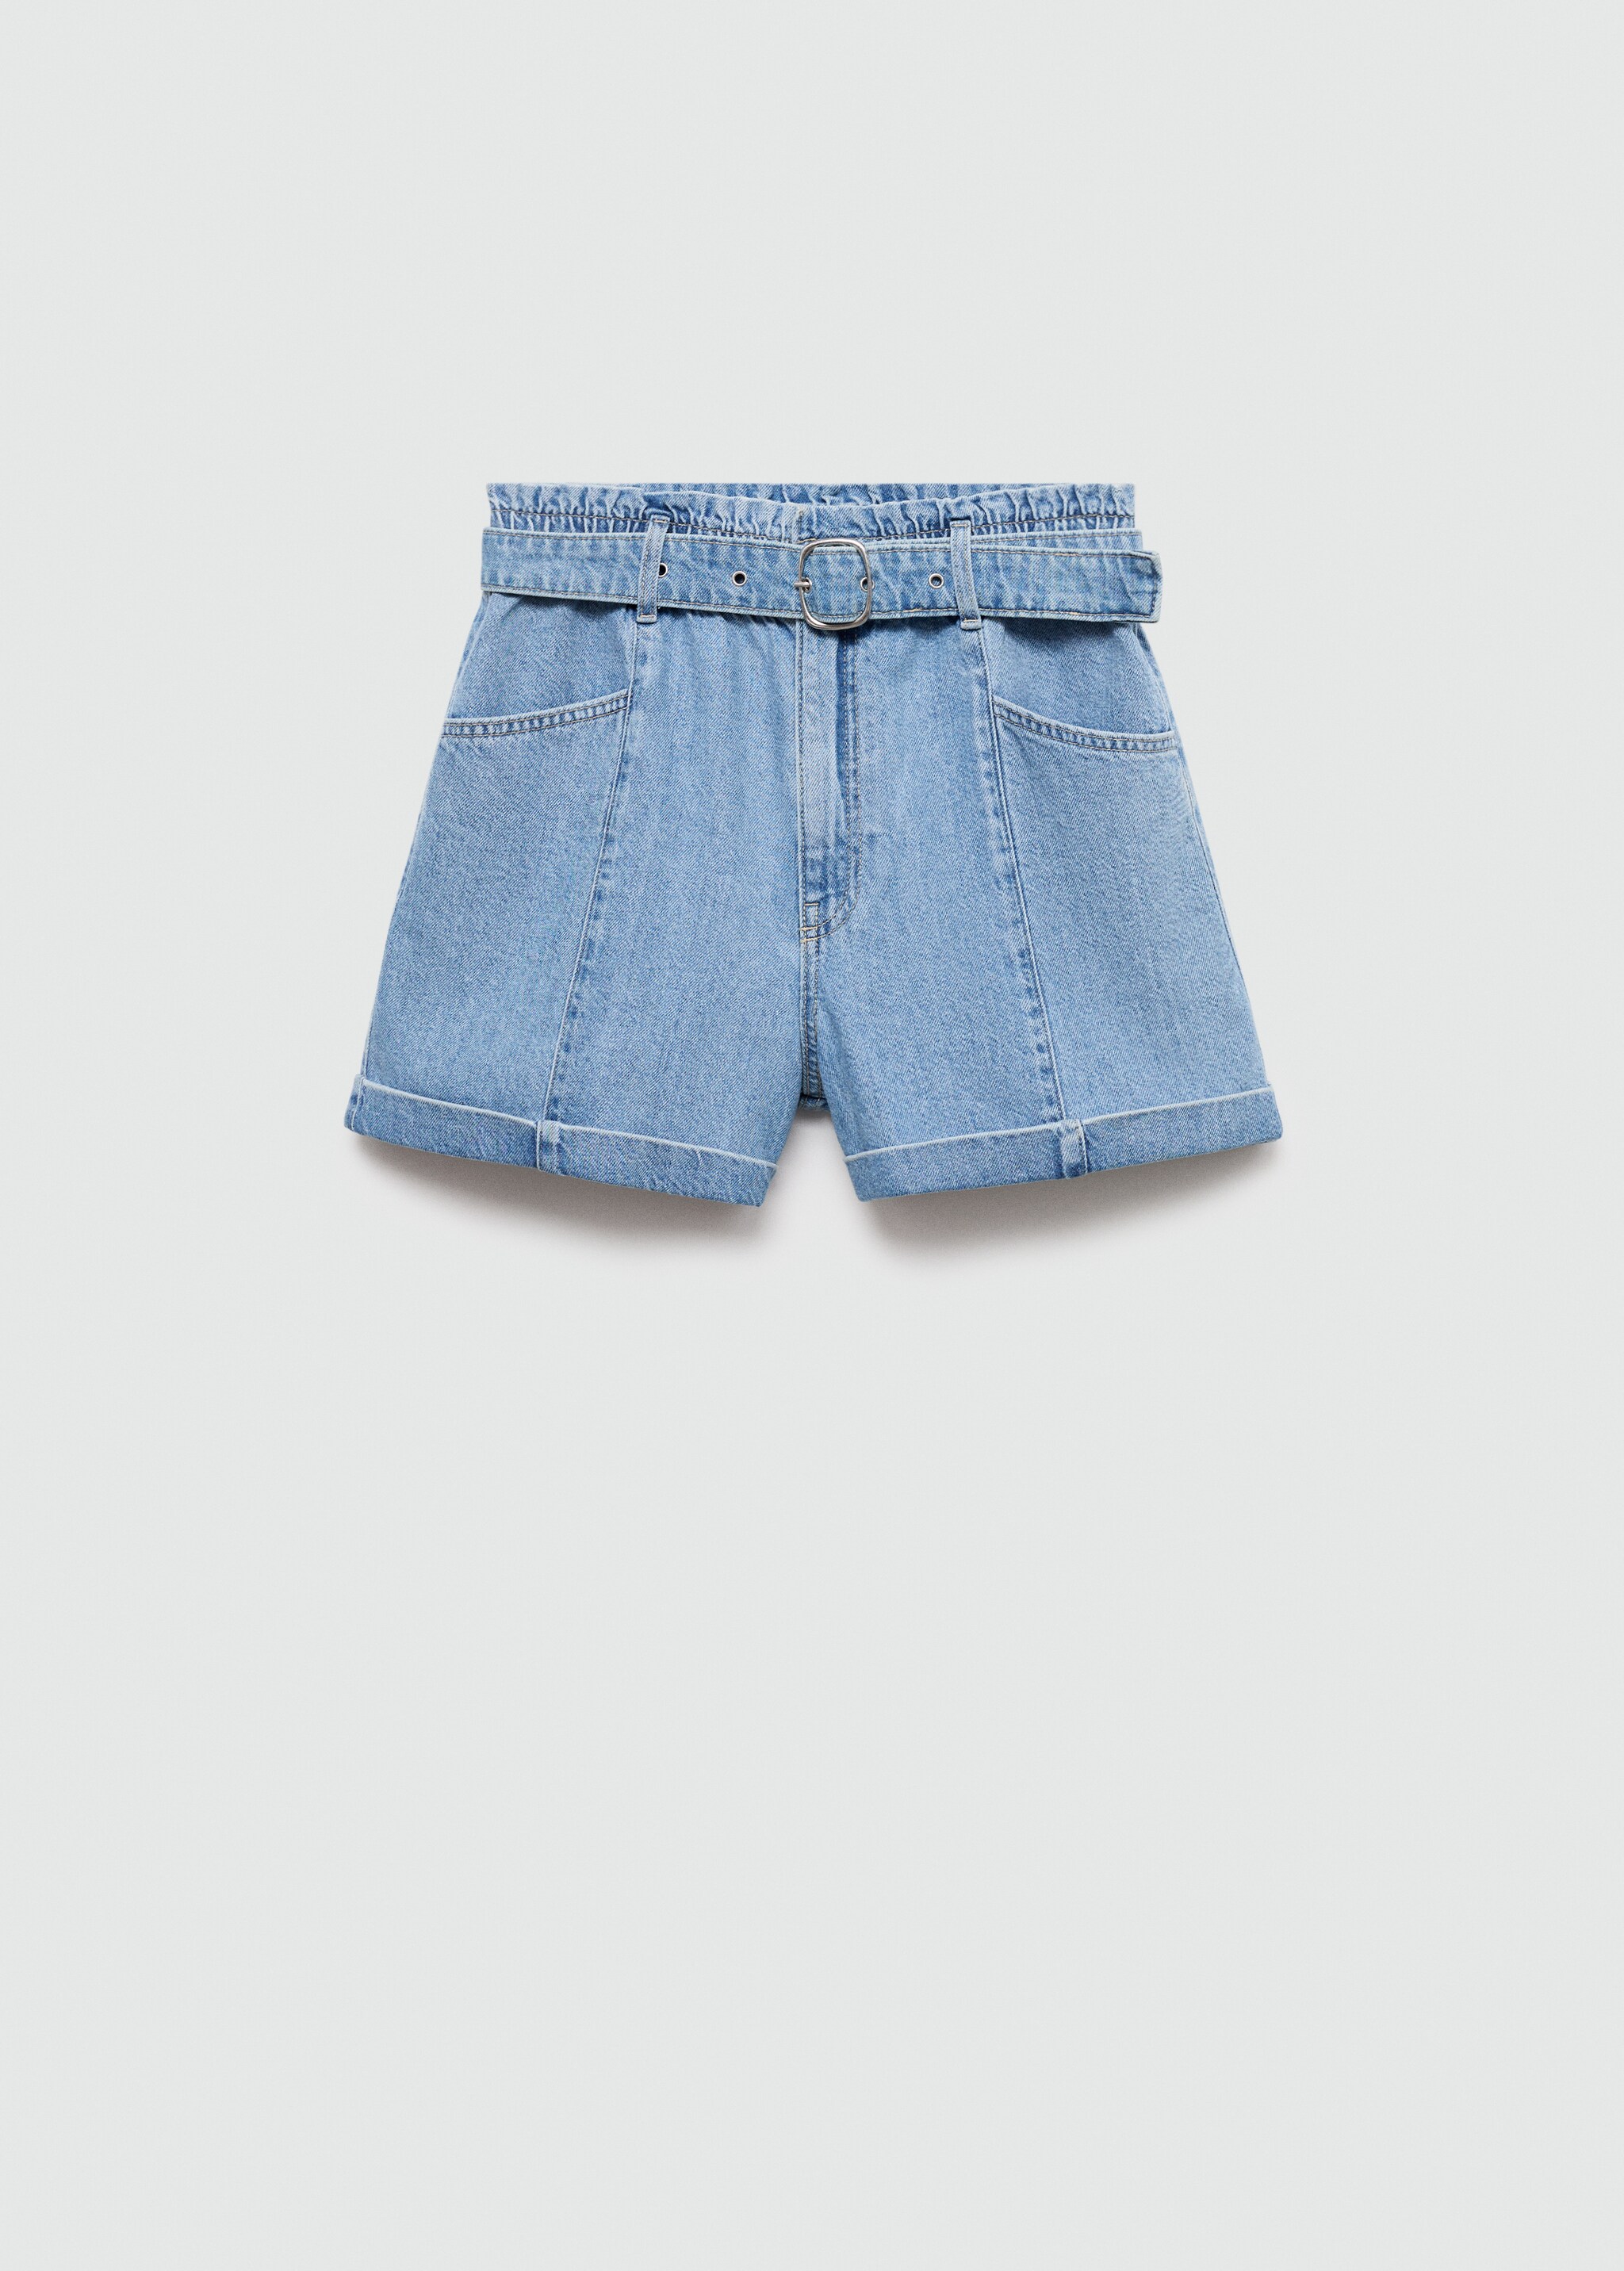 Denim shorts with belt - Article without model